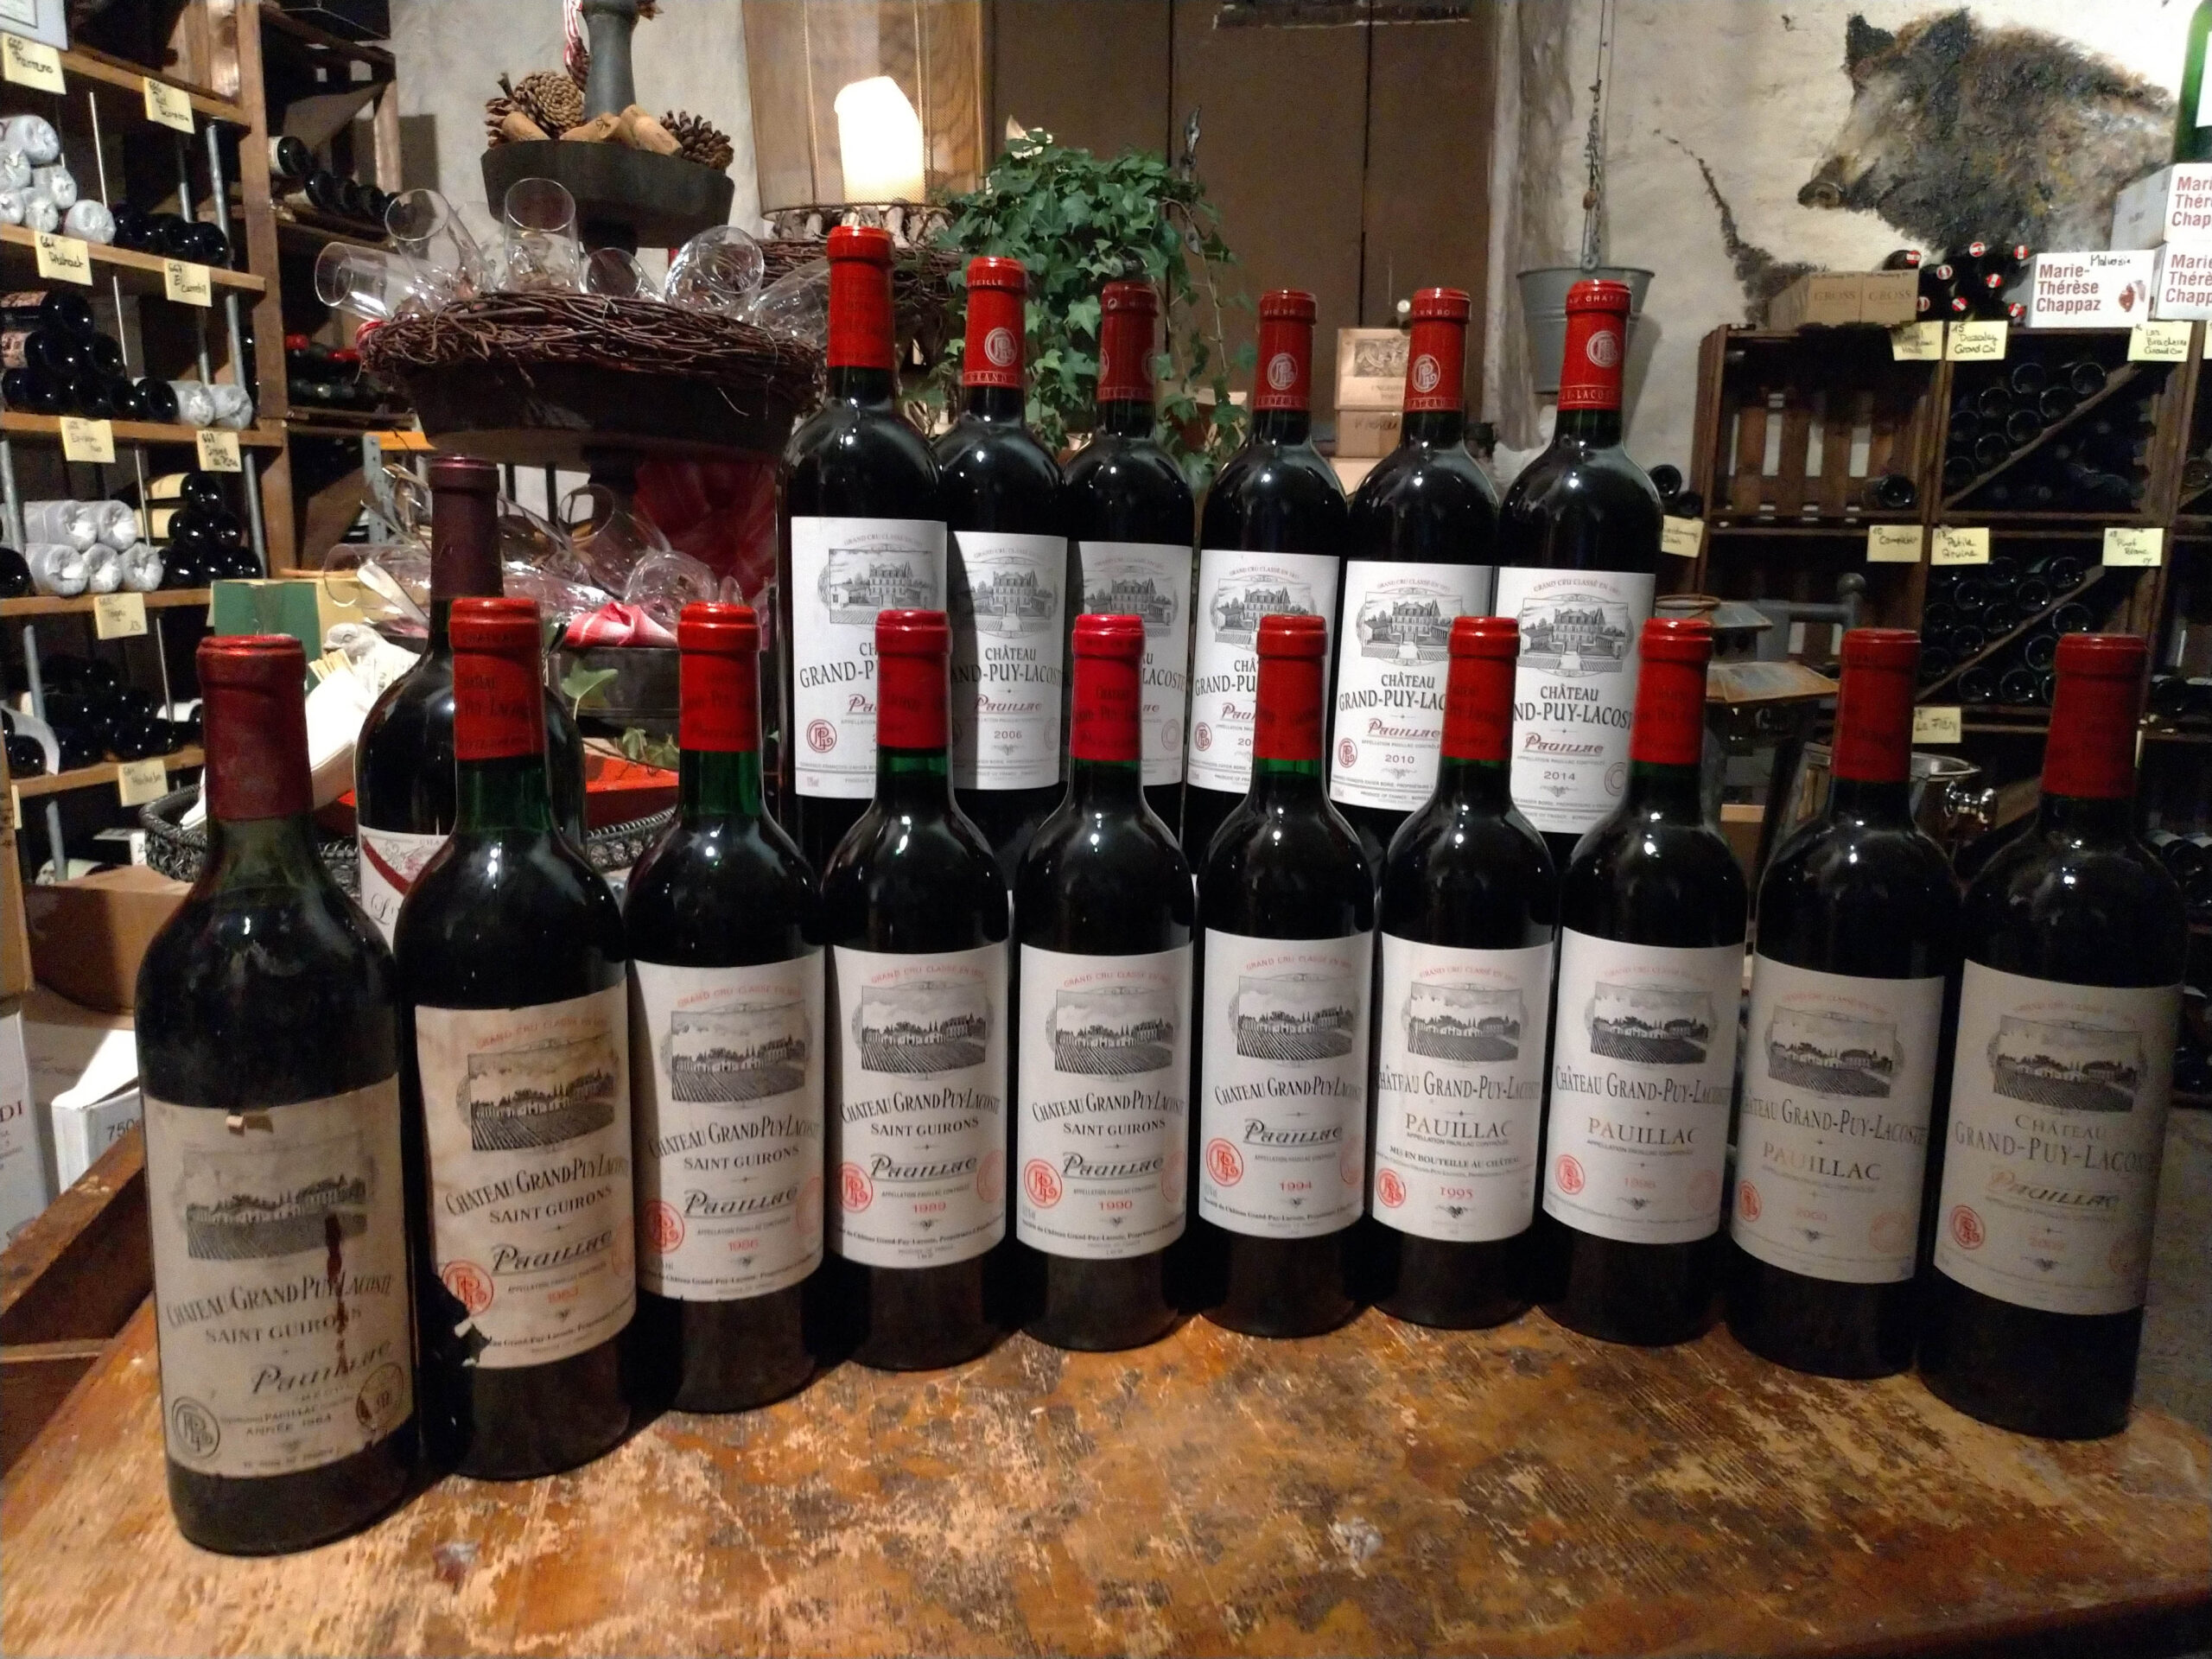 Grand-Puy-Lacoste - Tasting 2020